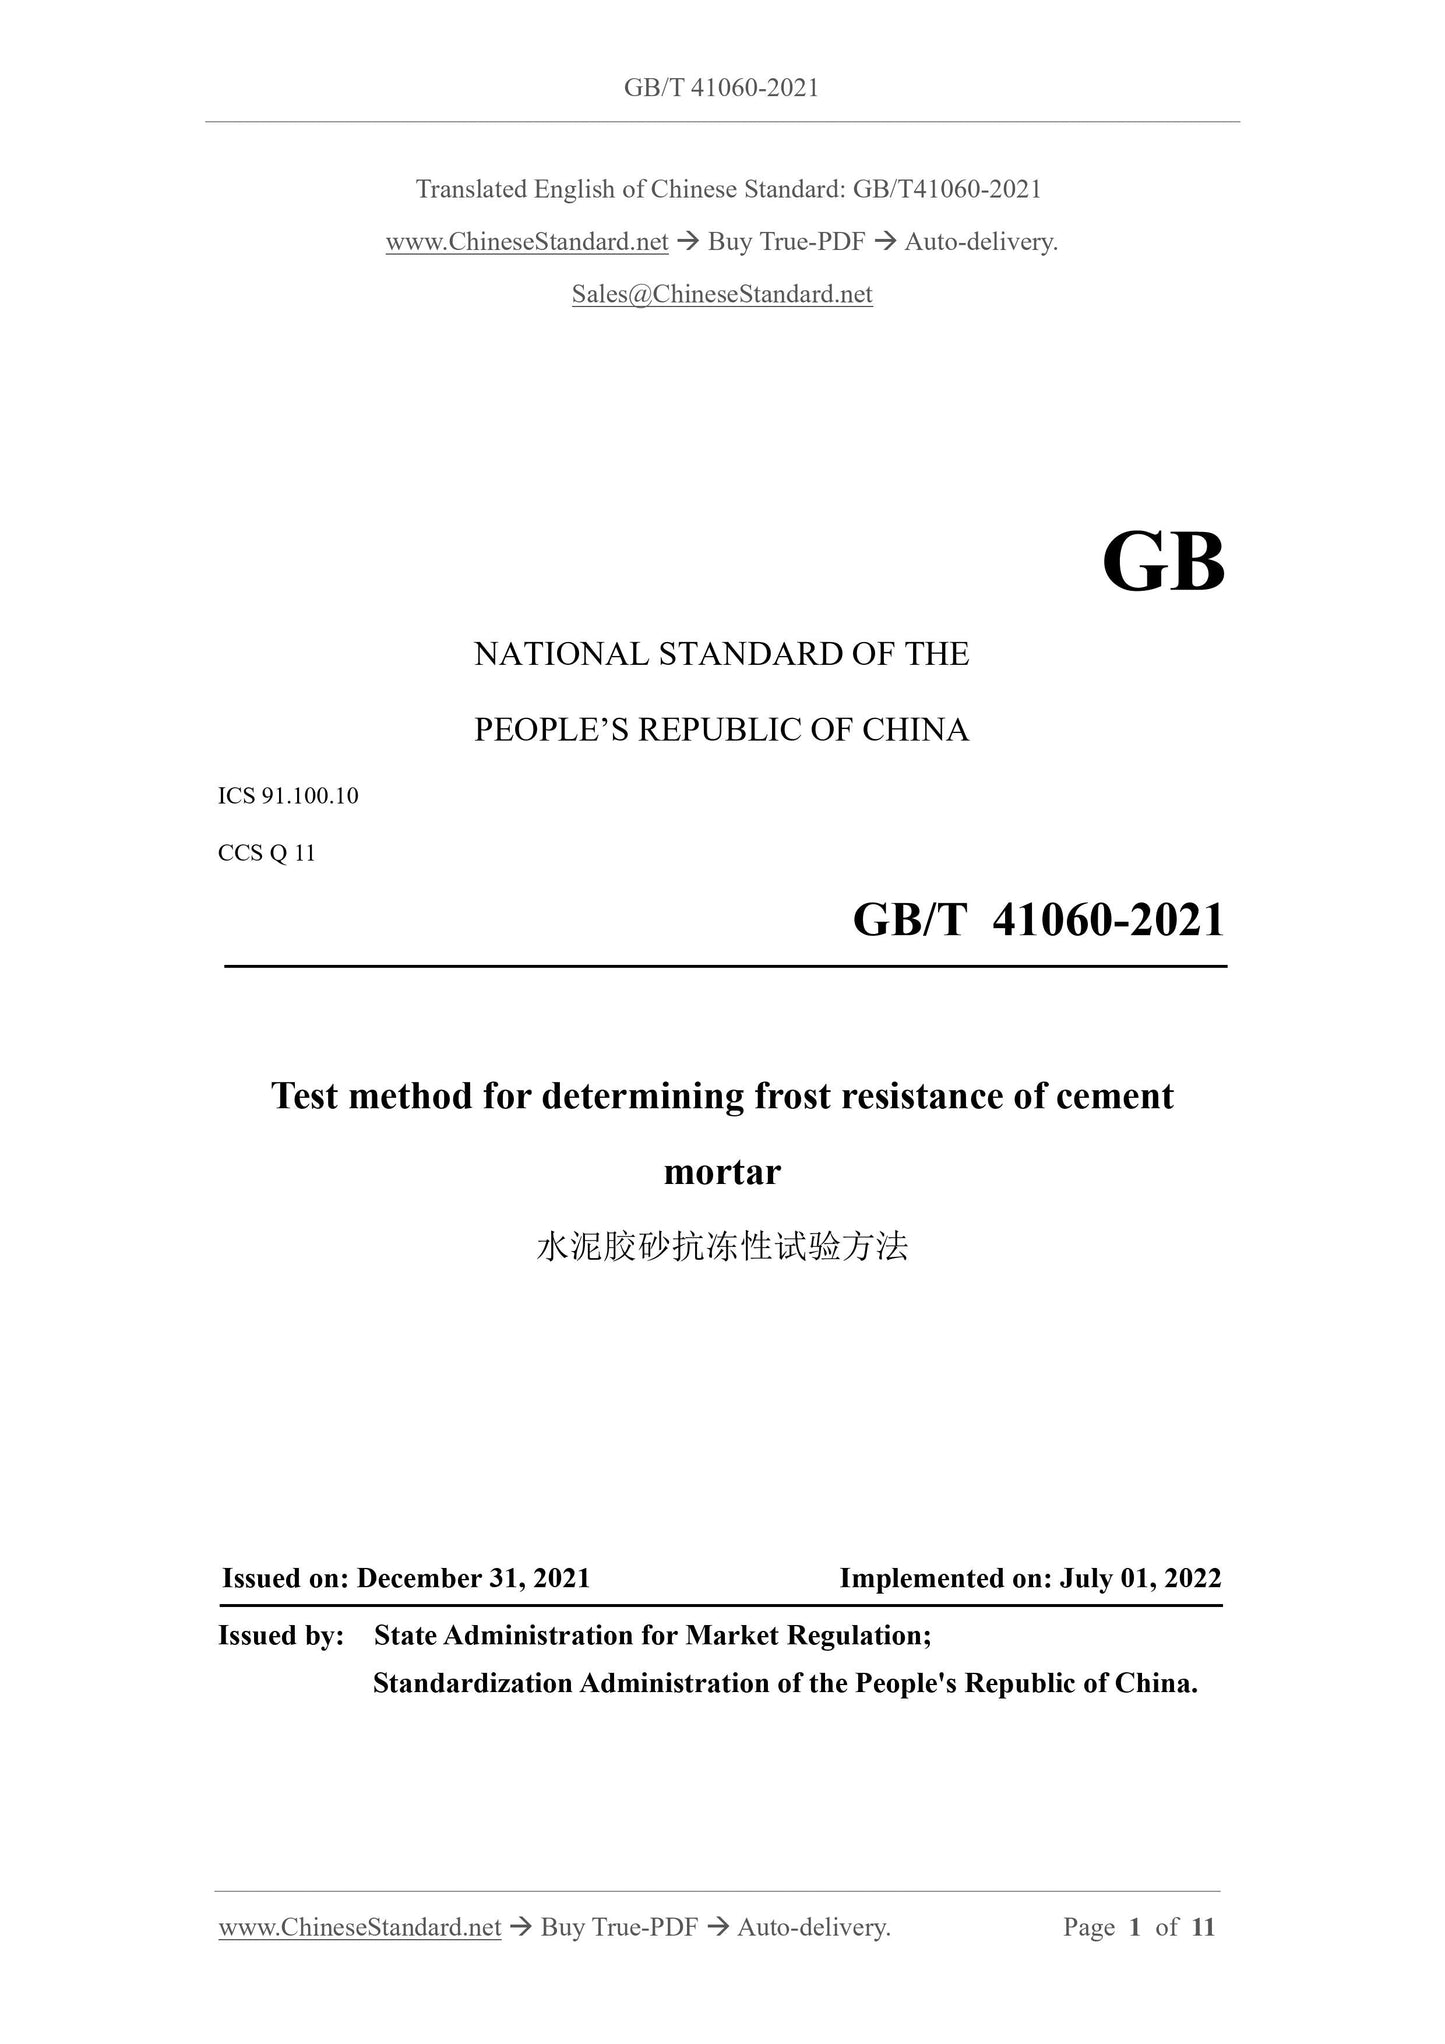 GB/T 41060-2021 Page 1